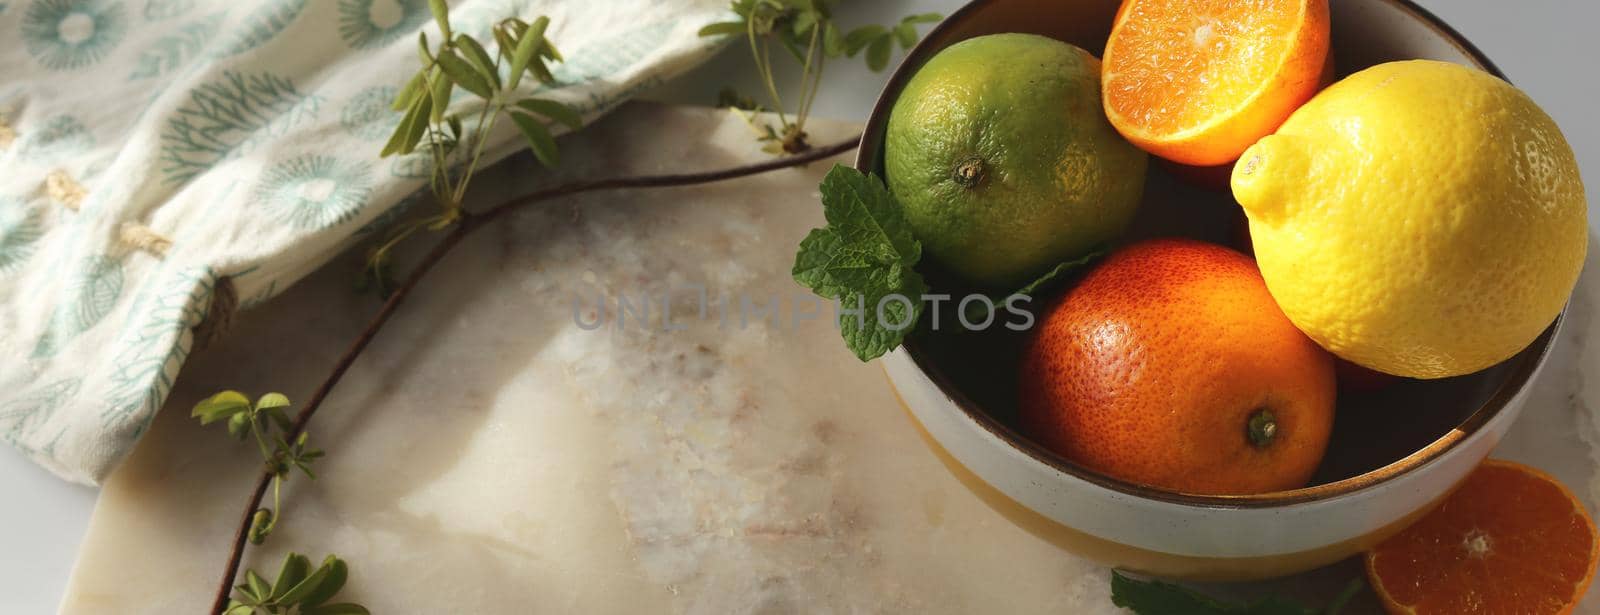 Citrus composition on marble table by NelliPolk